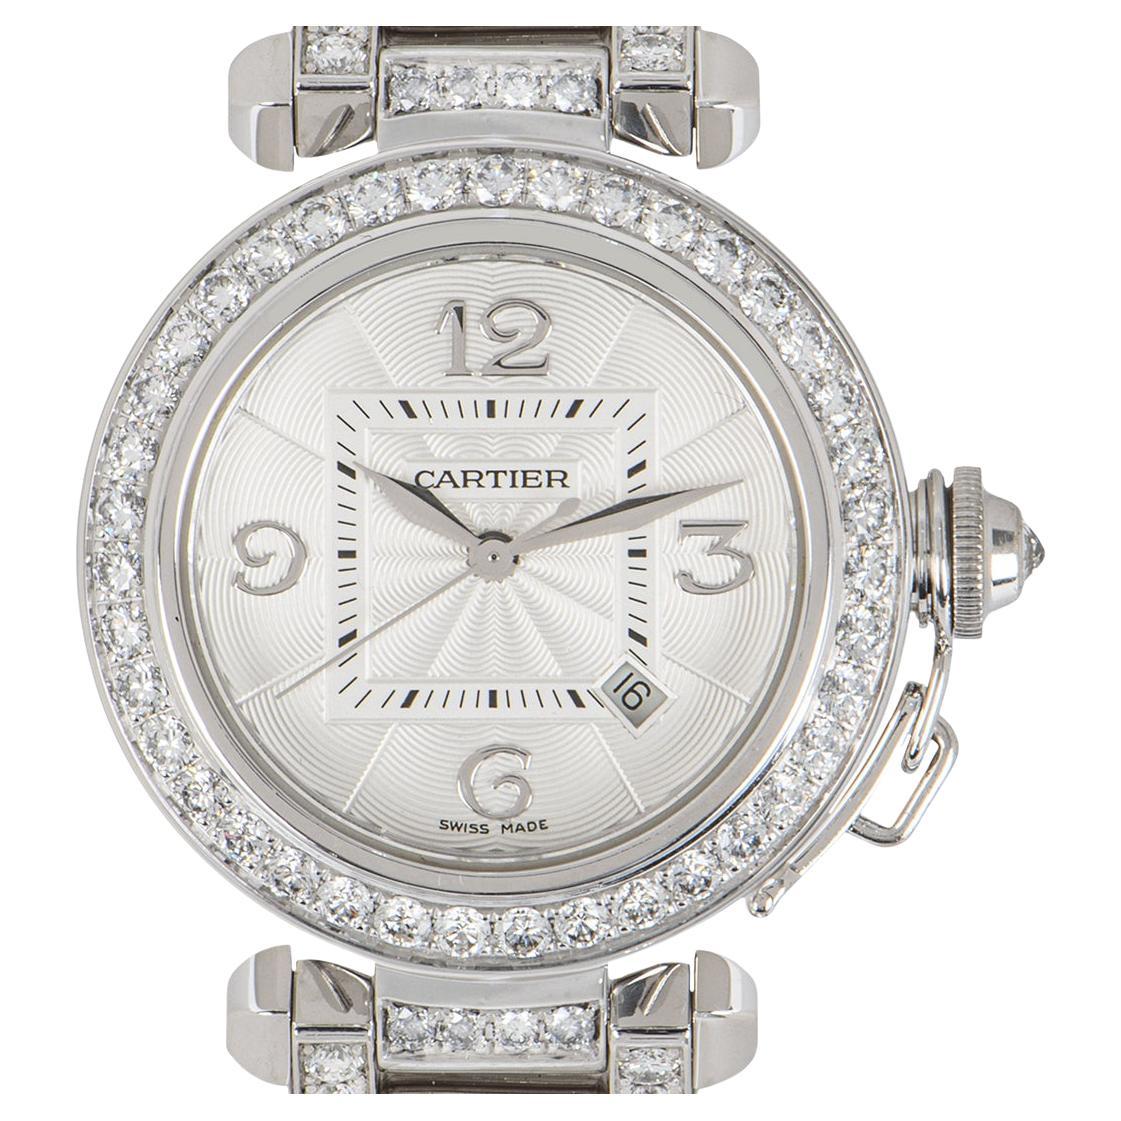 A stunning ladies 32mm Pasha wristwatch, crafted in 18k white gold by Cartier. Featuring a silver guilloche dial with white gold arabic numbers and a date display. Complimenting the dial is a fixed white gold diamond set bezel and crown. 

Fitted